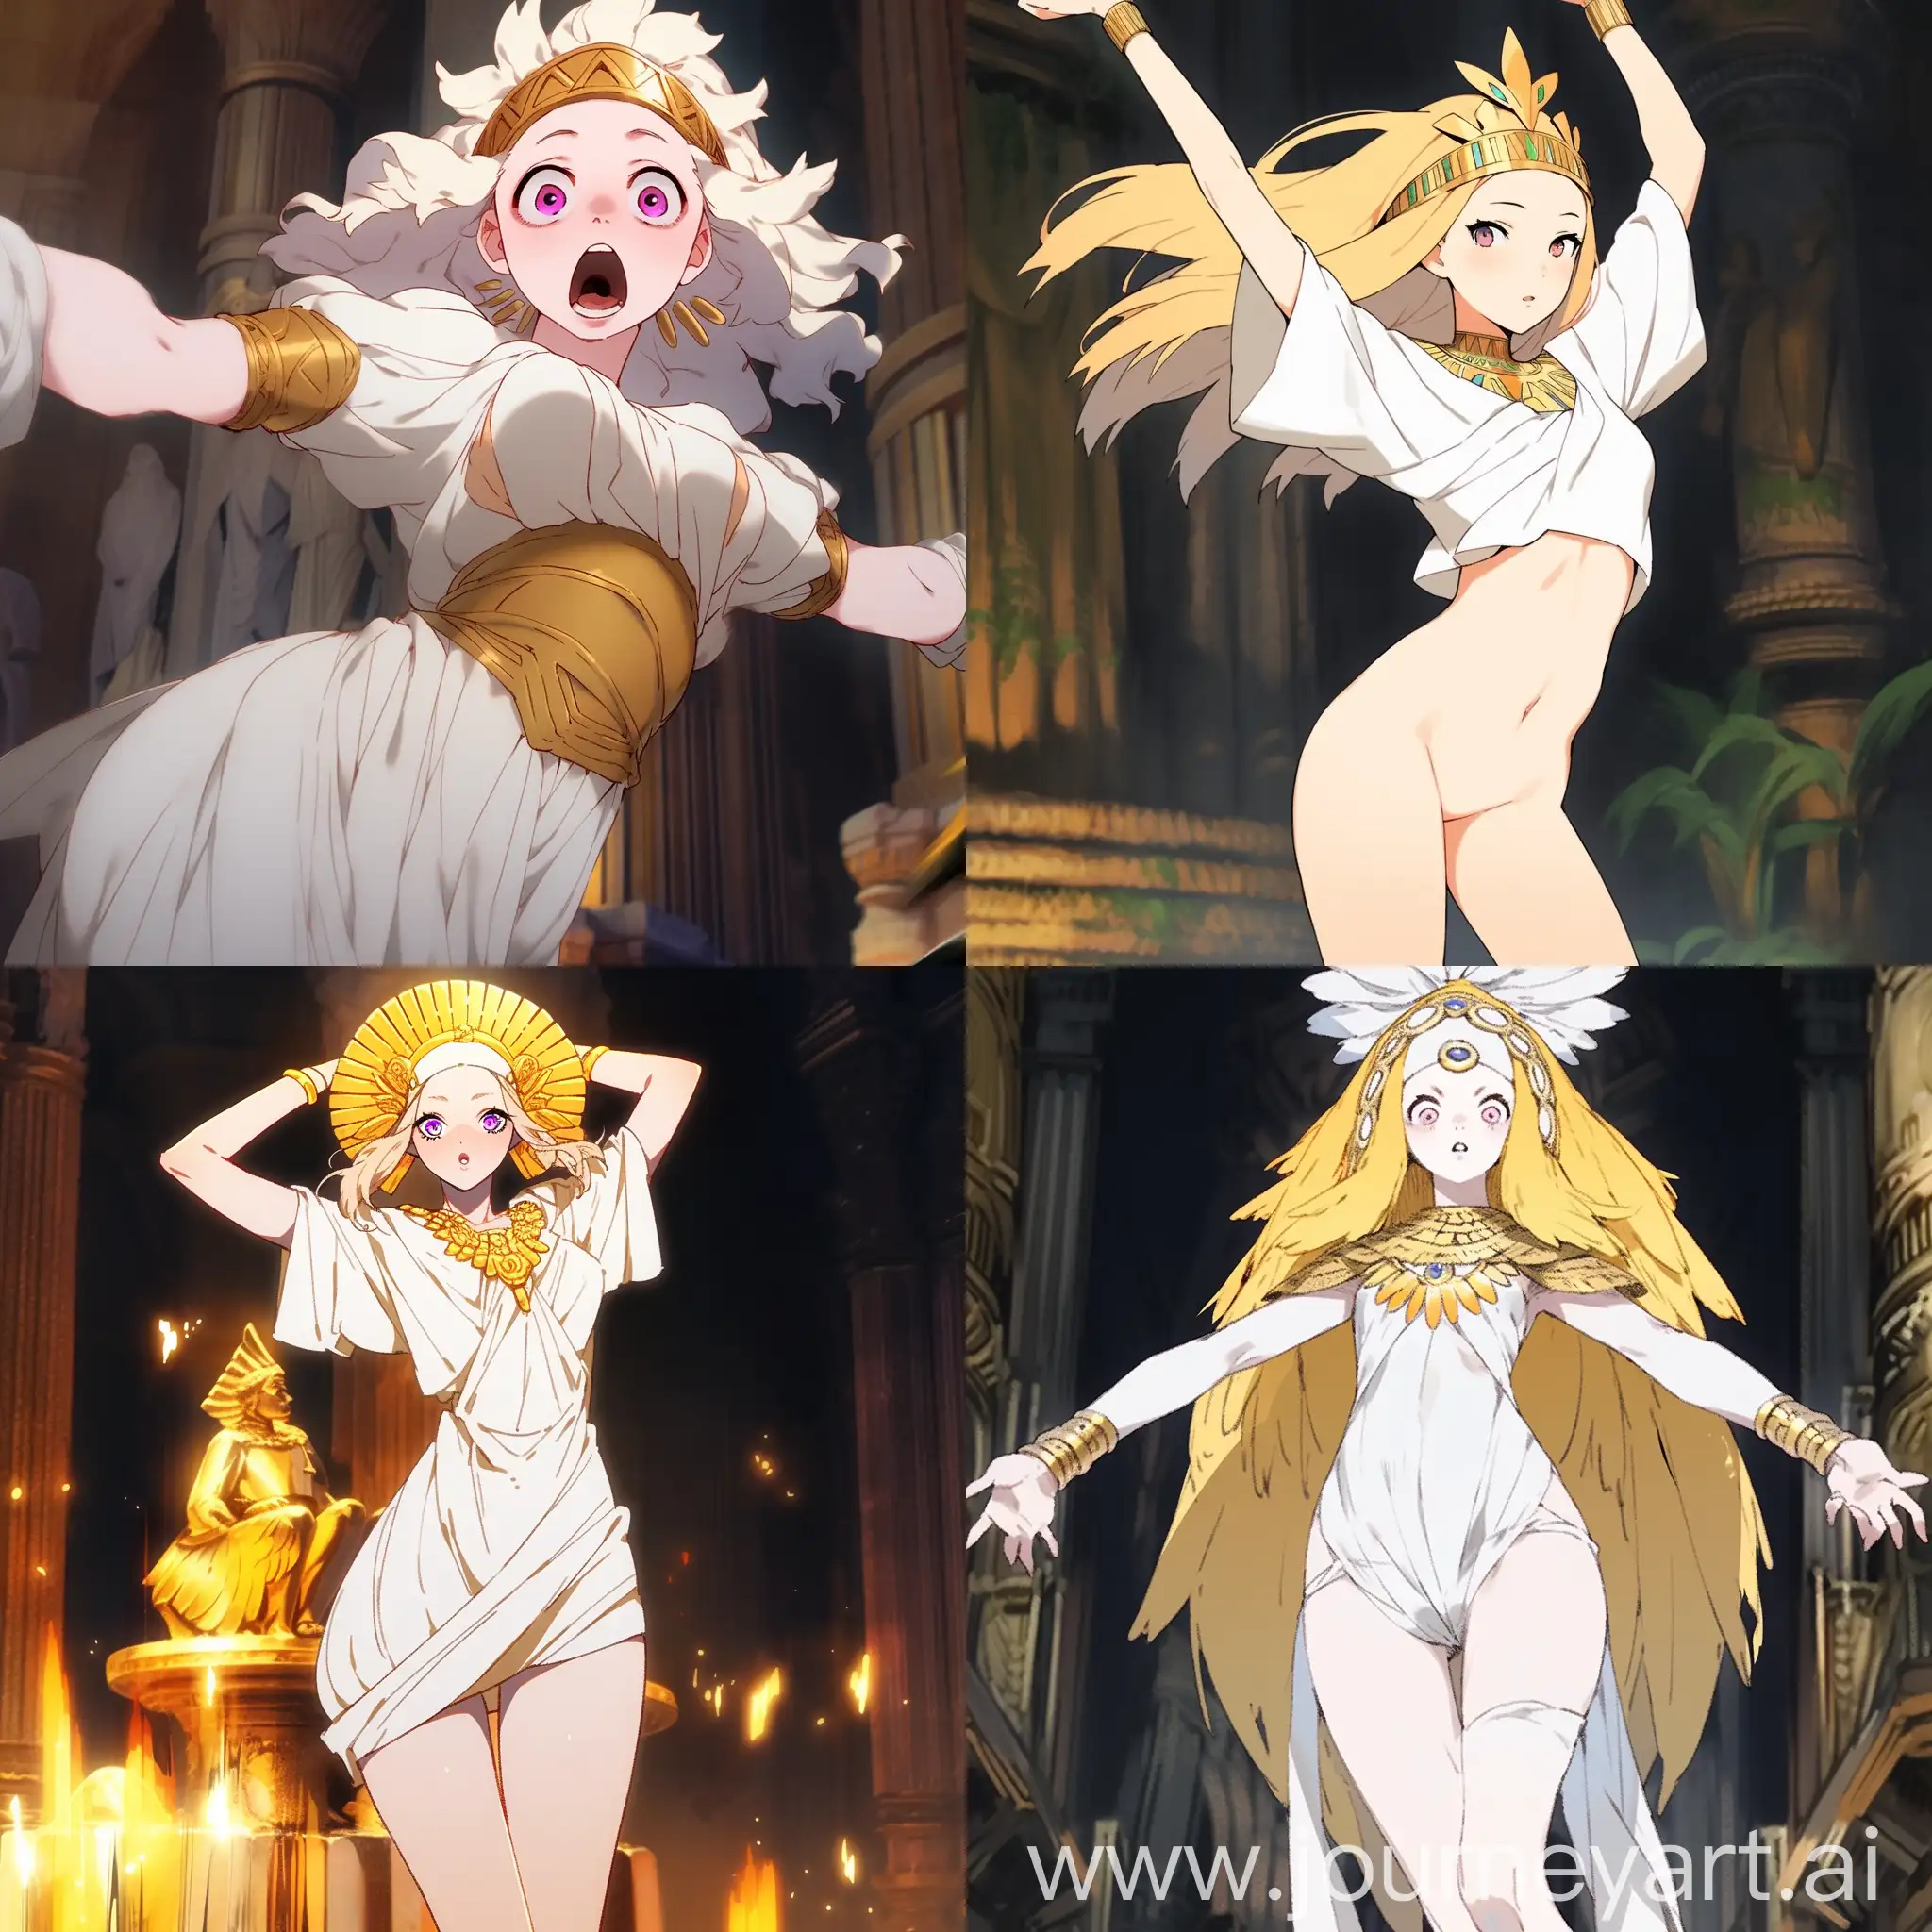 masterpiece, platinum blonde hair,yellow eyes,straight medium hair, forehead, white outfit, ancient babylonian clothing, dynamic pose, cinematic lighting, in market place, artistic --niji 5 --style expressive